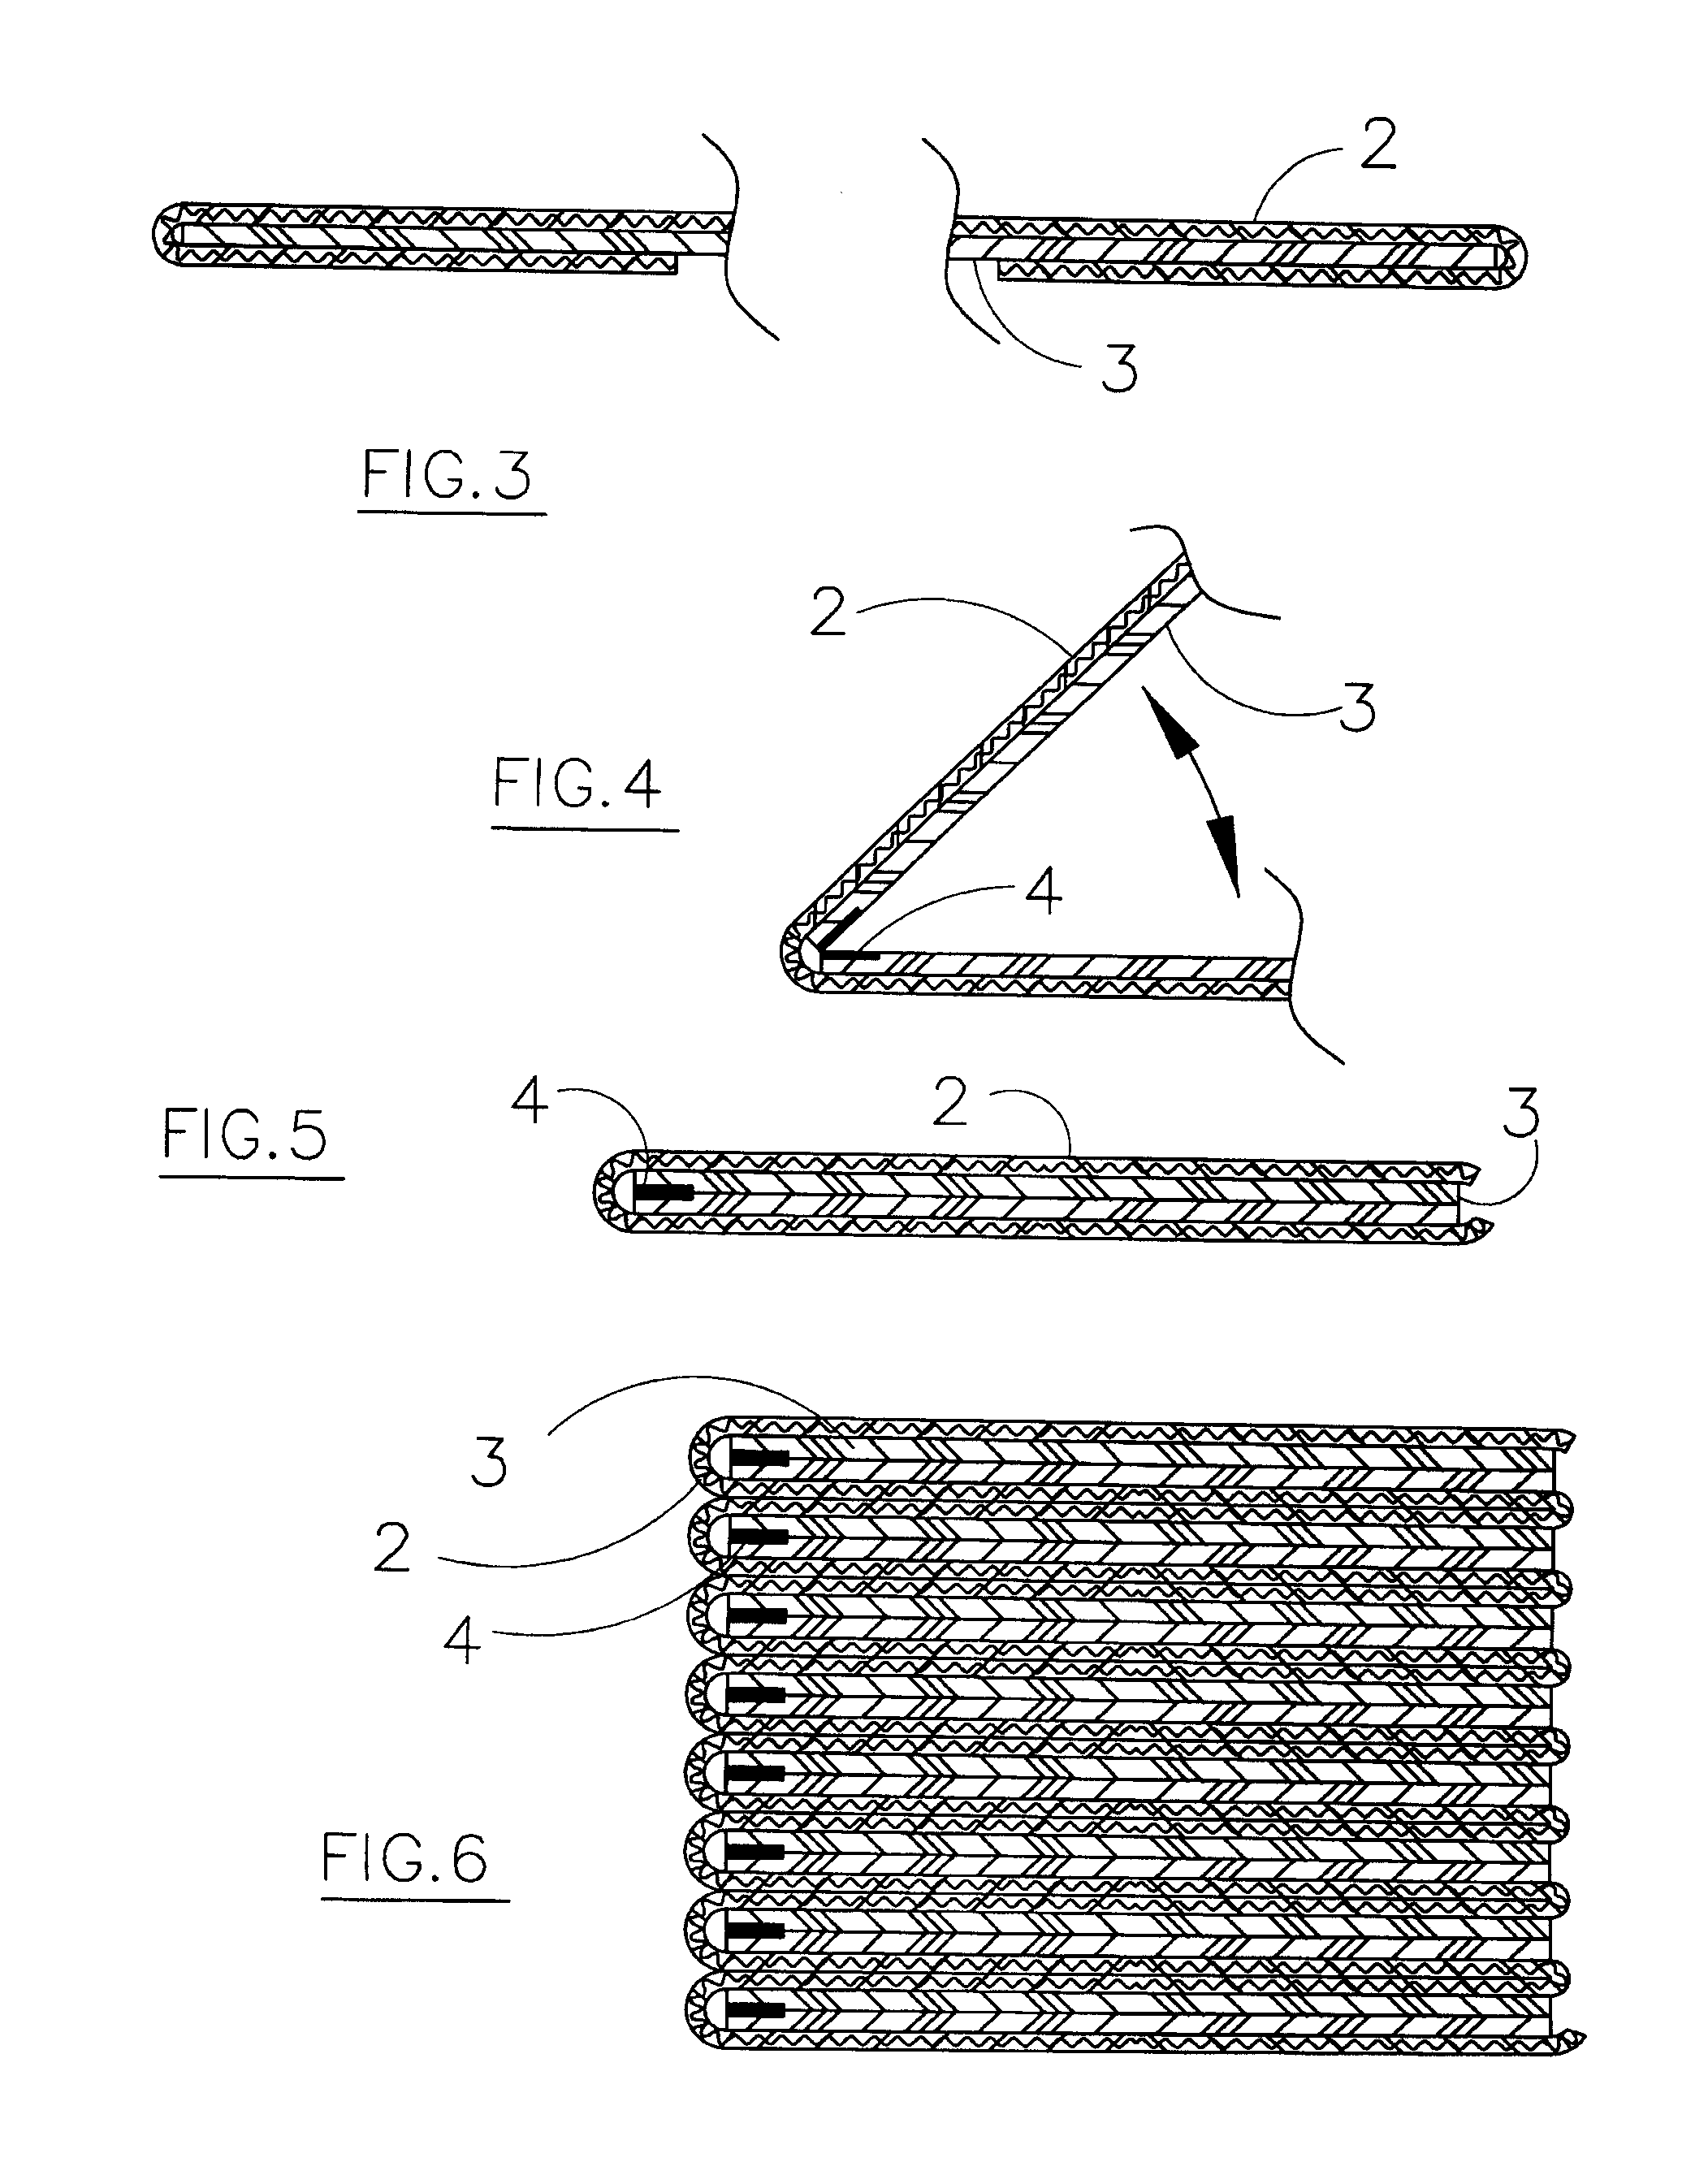 Apparatus for Folding, Stacking and Storing Bedsheets